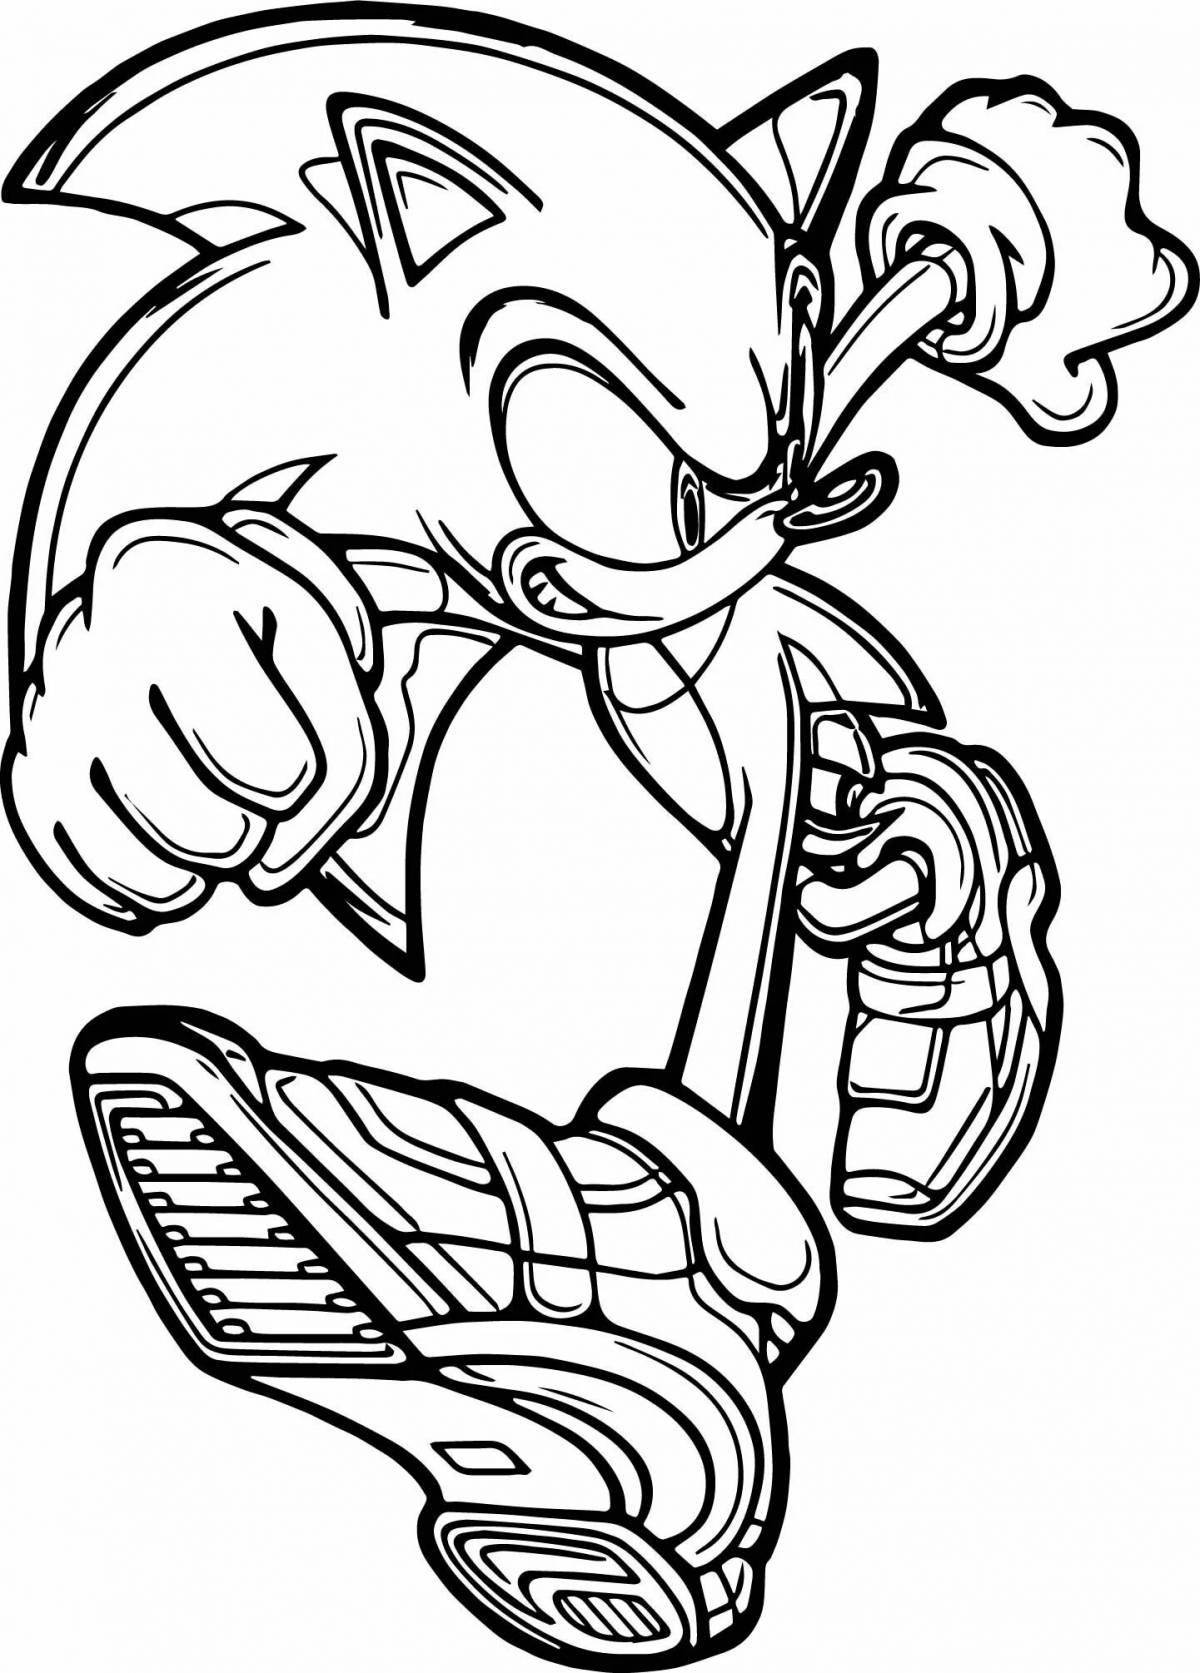 Charming sonic metal coloring book